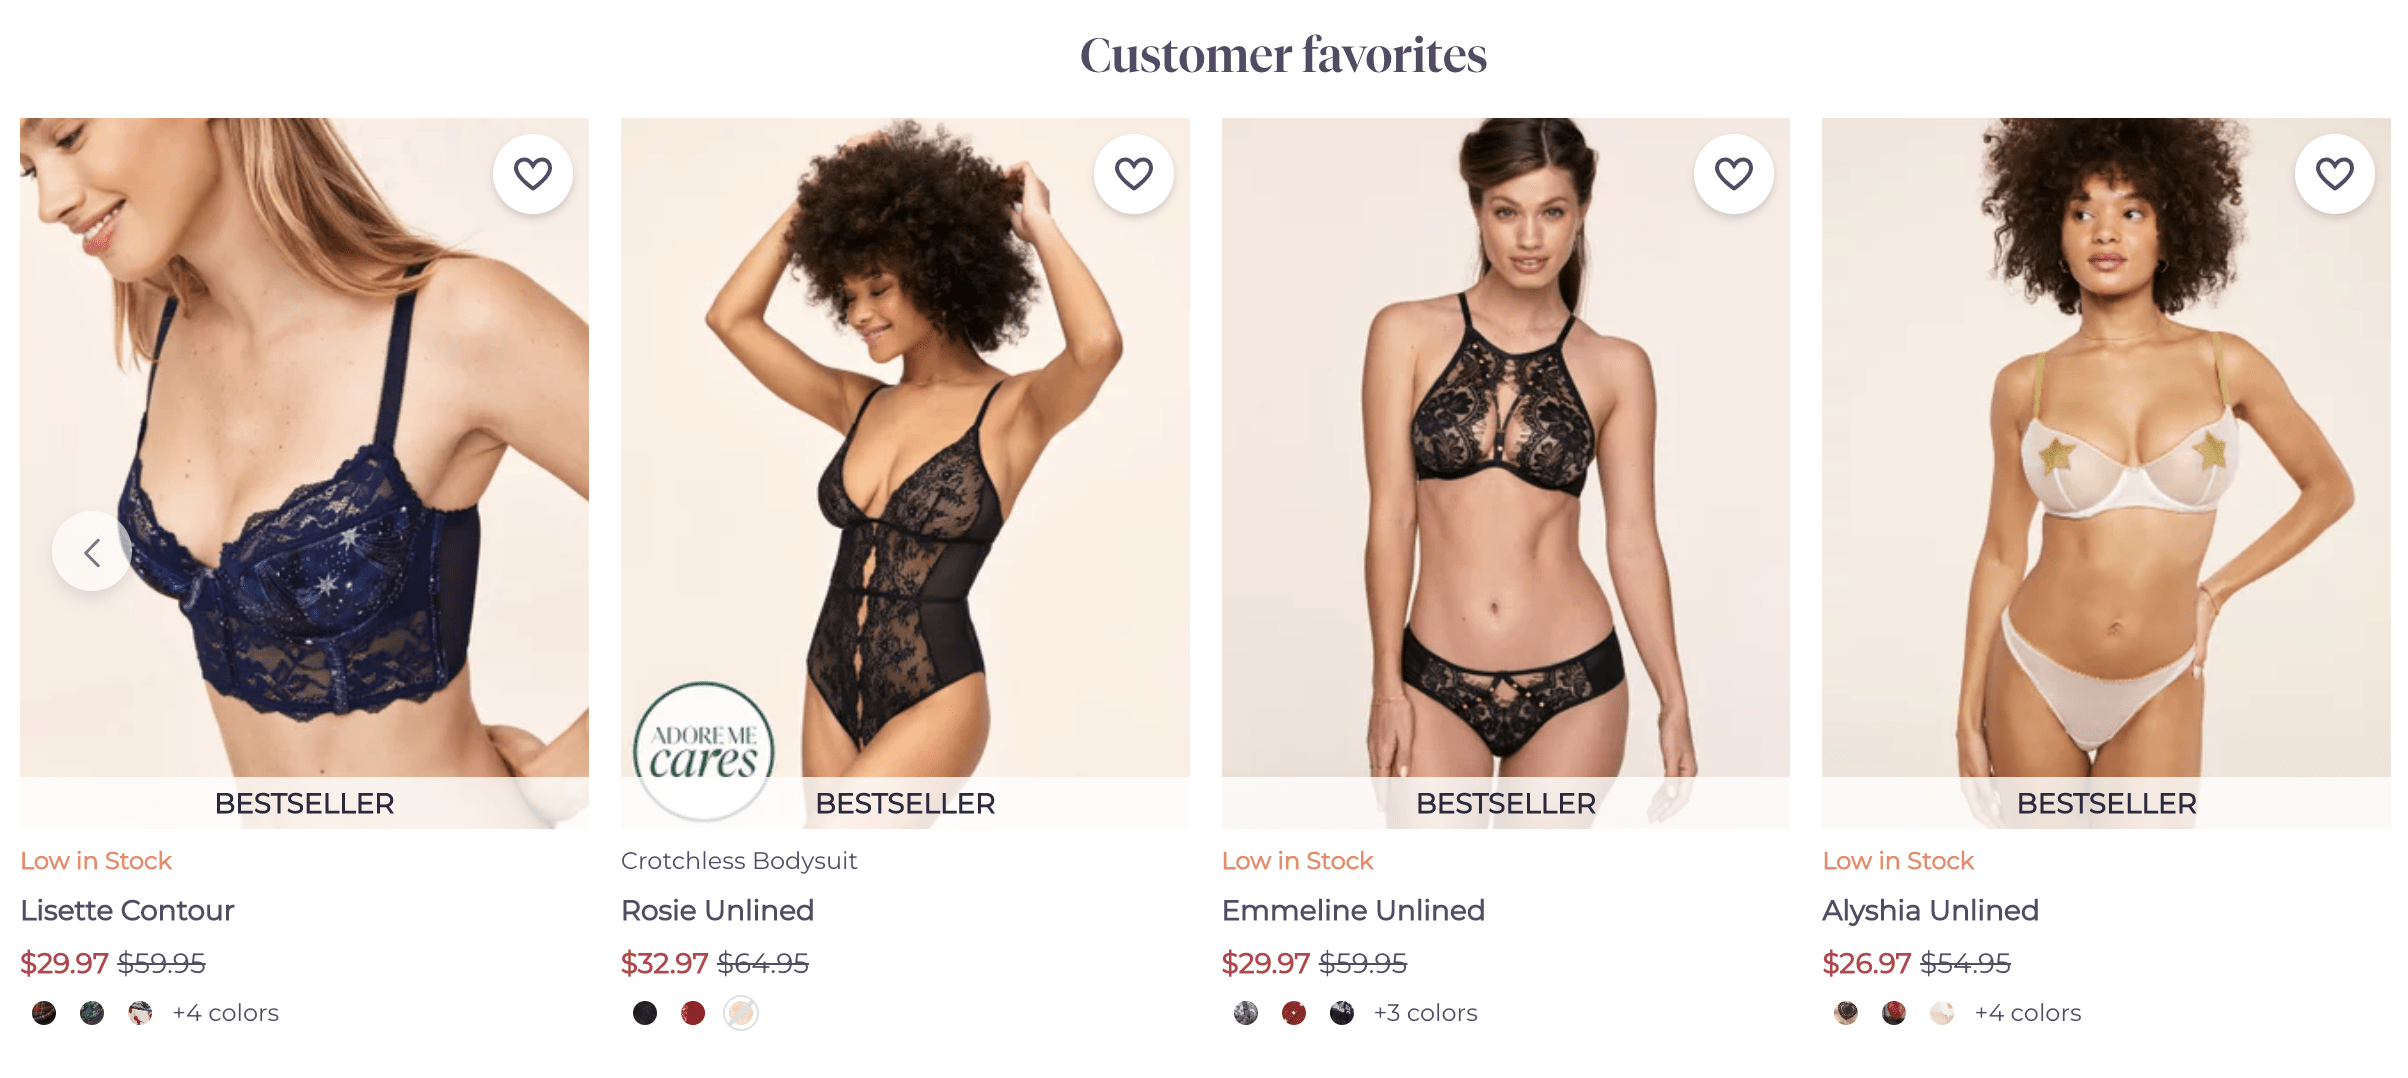 What are the size differences between Victoria secret and adore me